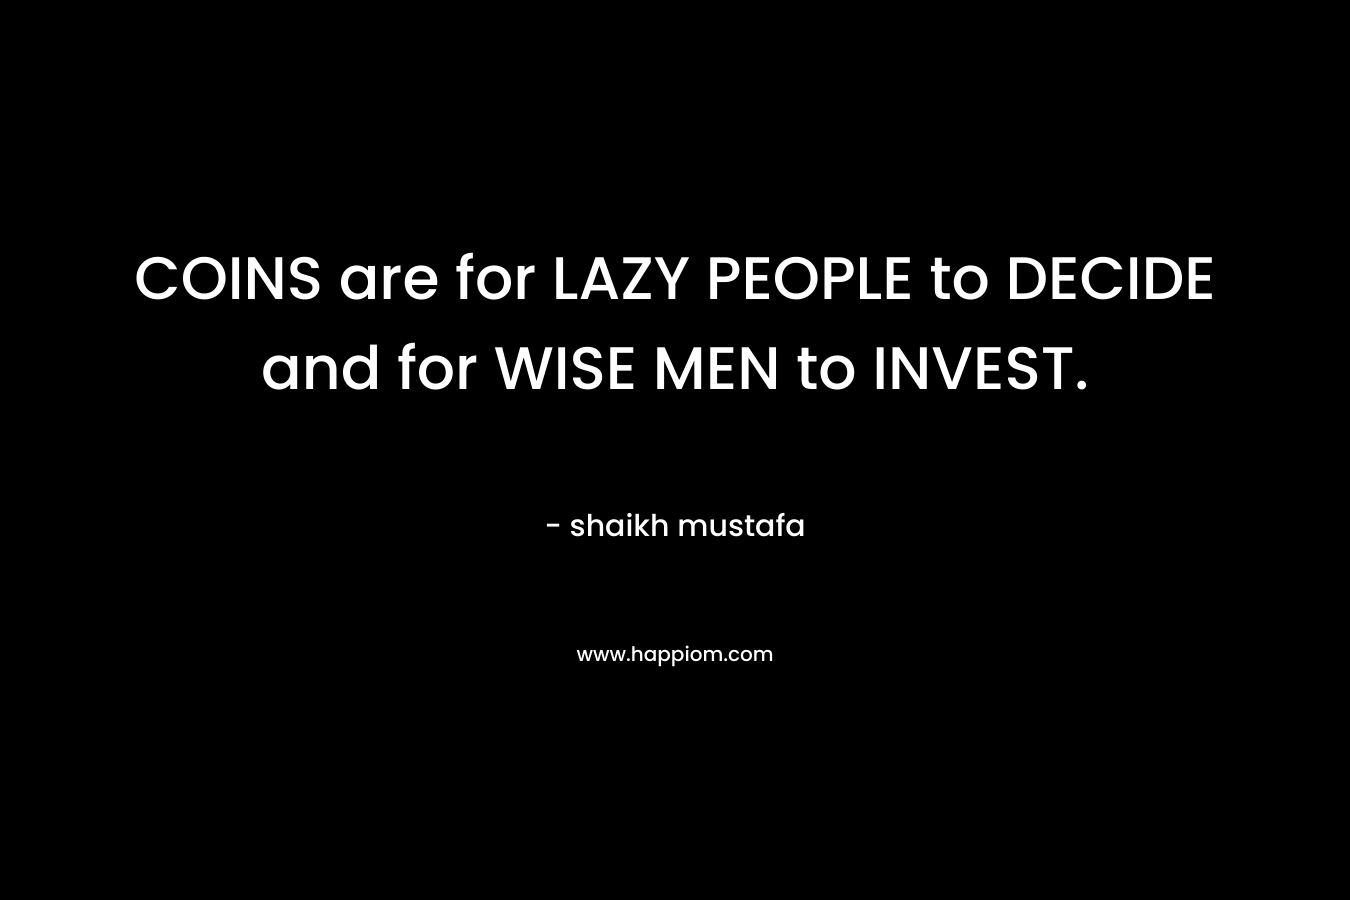 COINS are for LAZY PEOPLE to DECIDE and for WISE MEN to INVEST. – shaikh mustafa